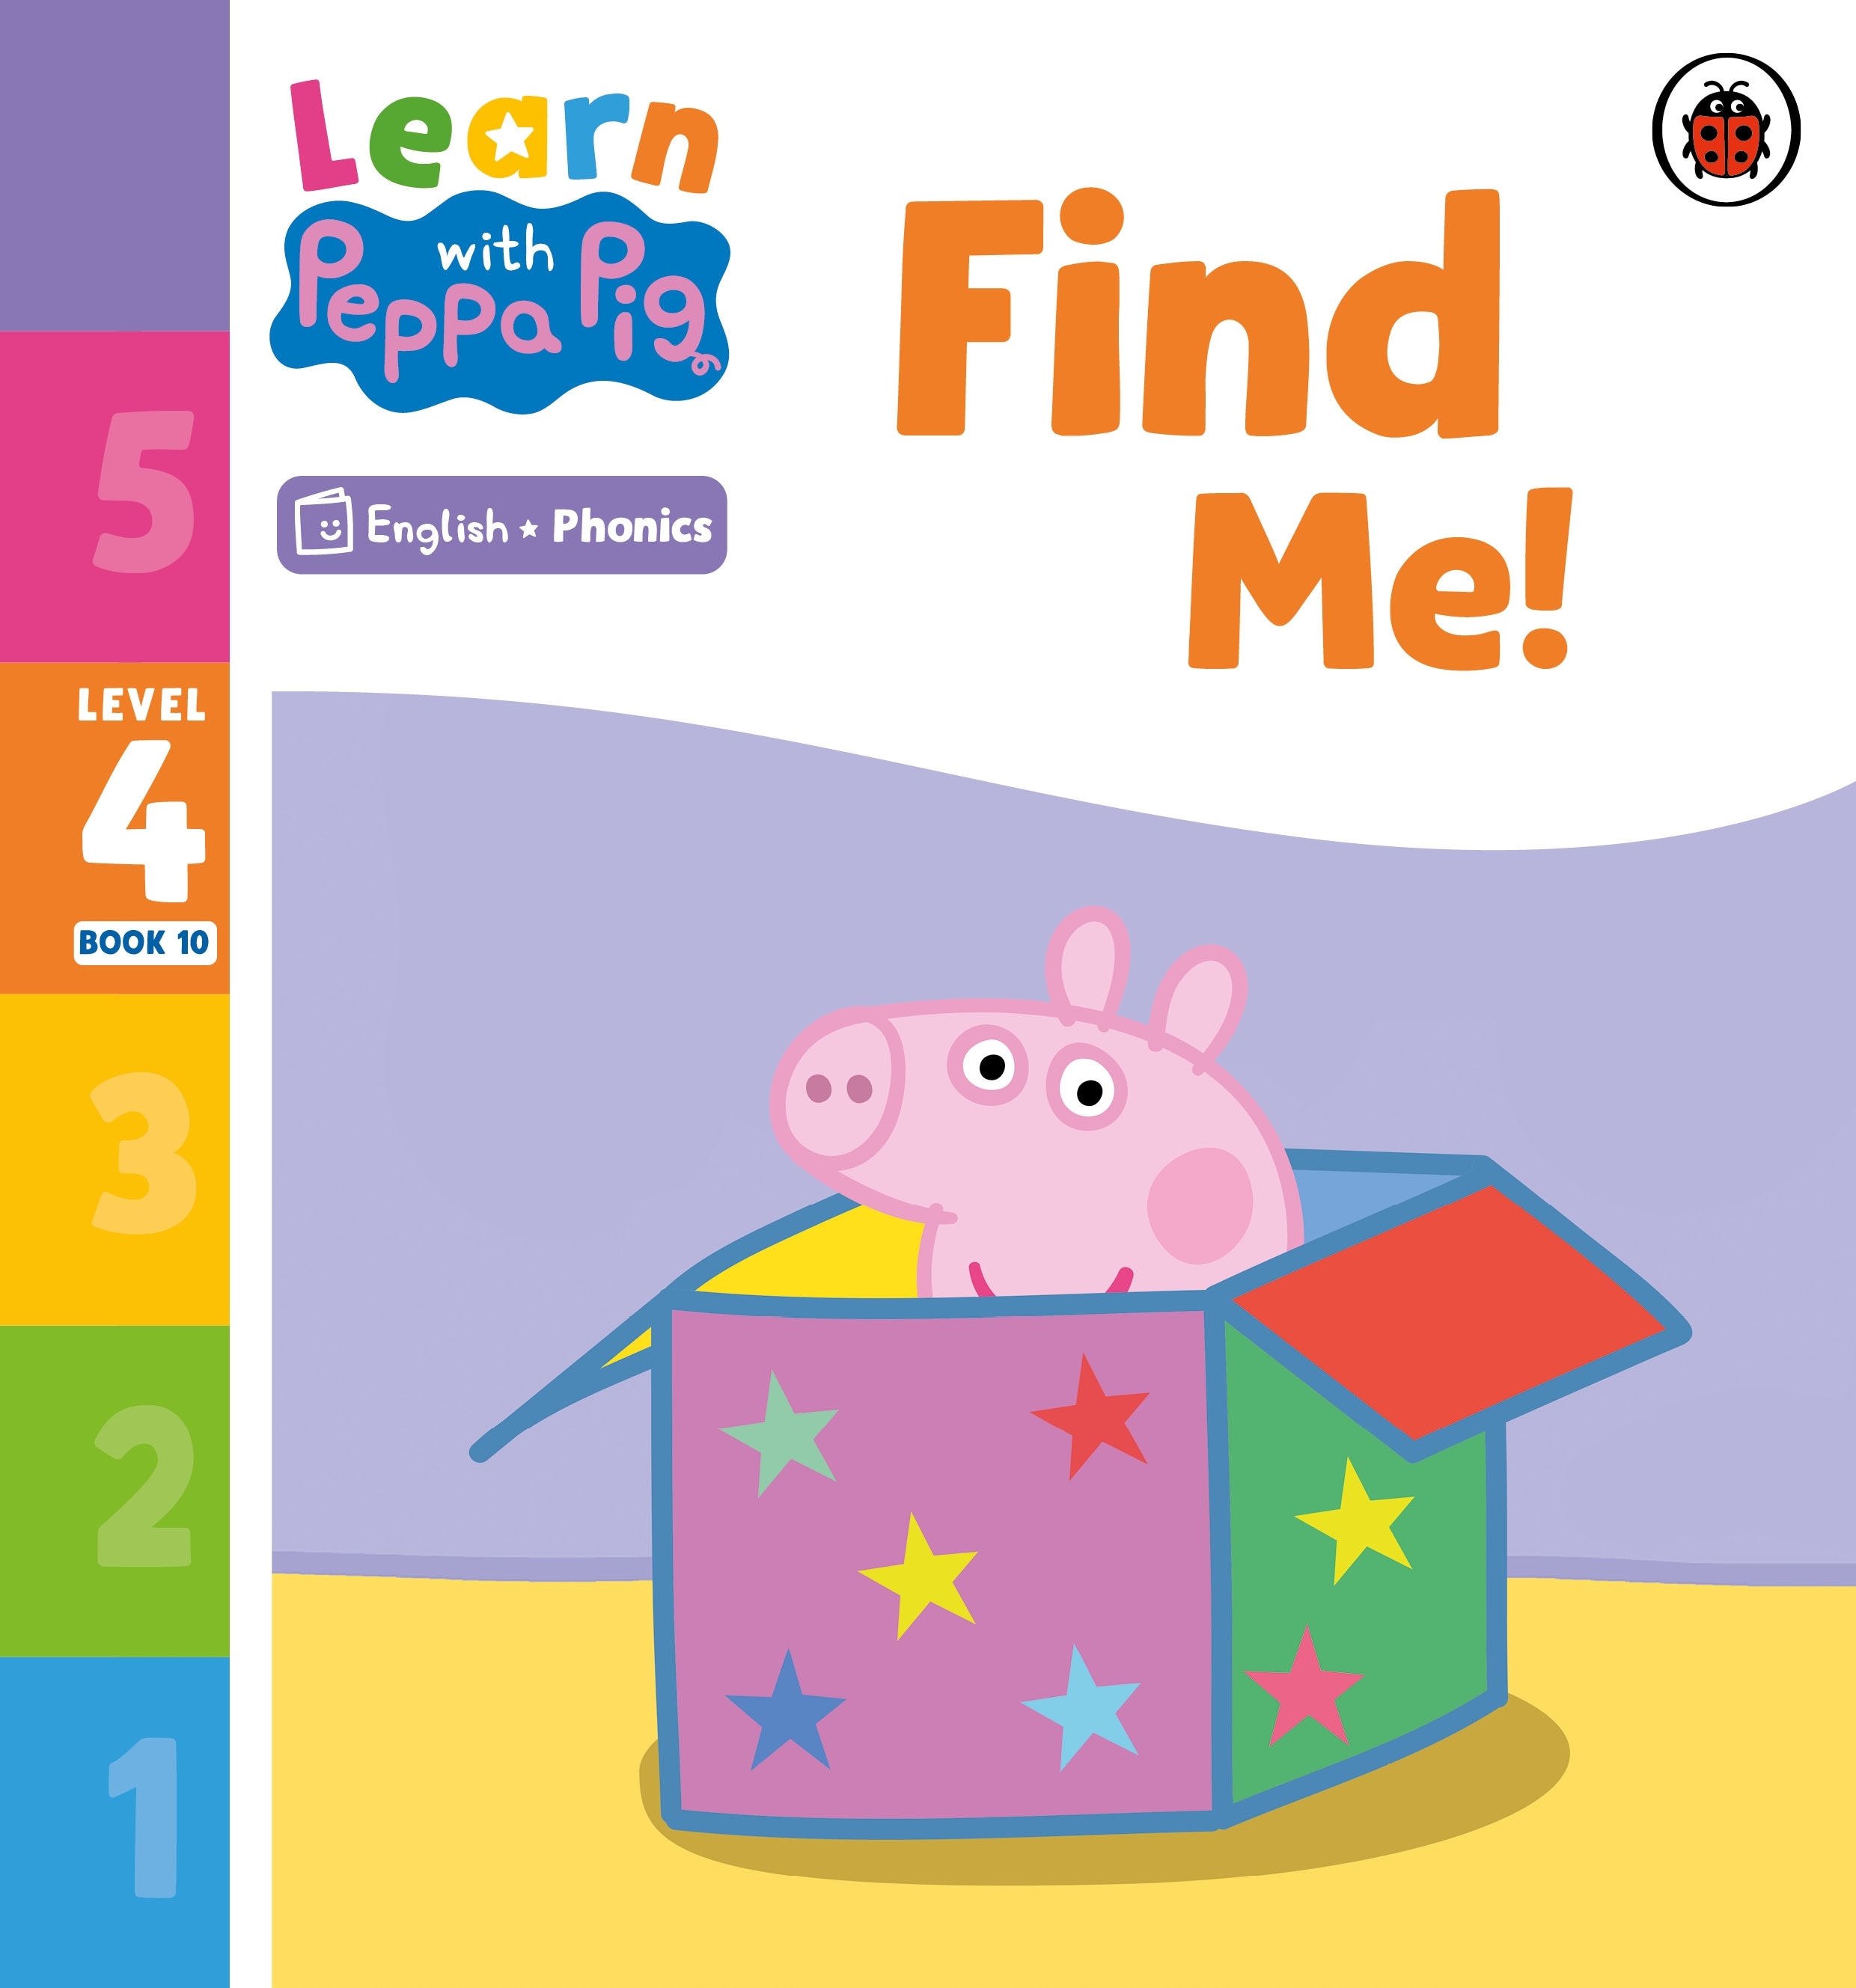 Learn with Peppa Phonics Level 4 Book 10 — Find Me! (Phonics Reader)